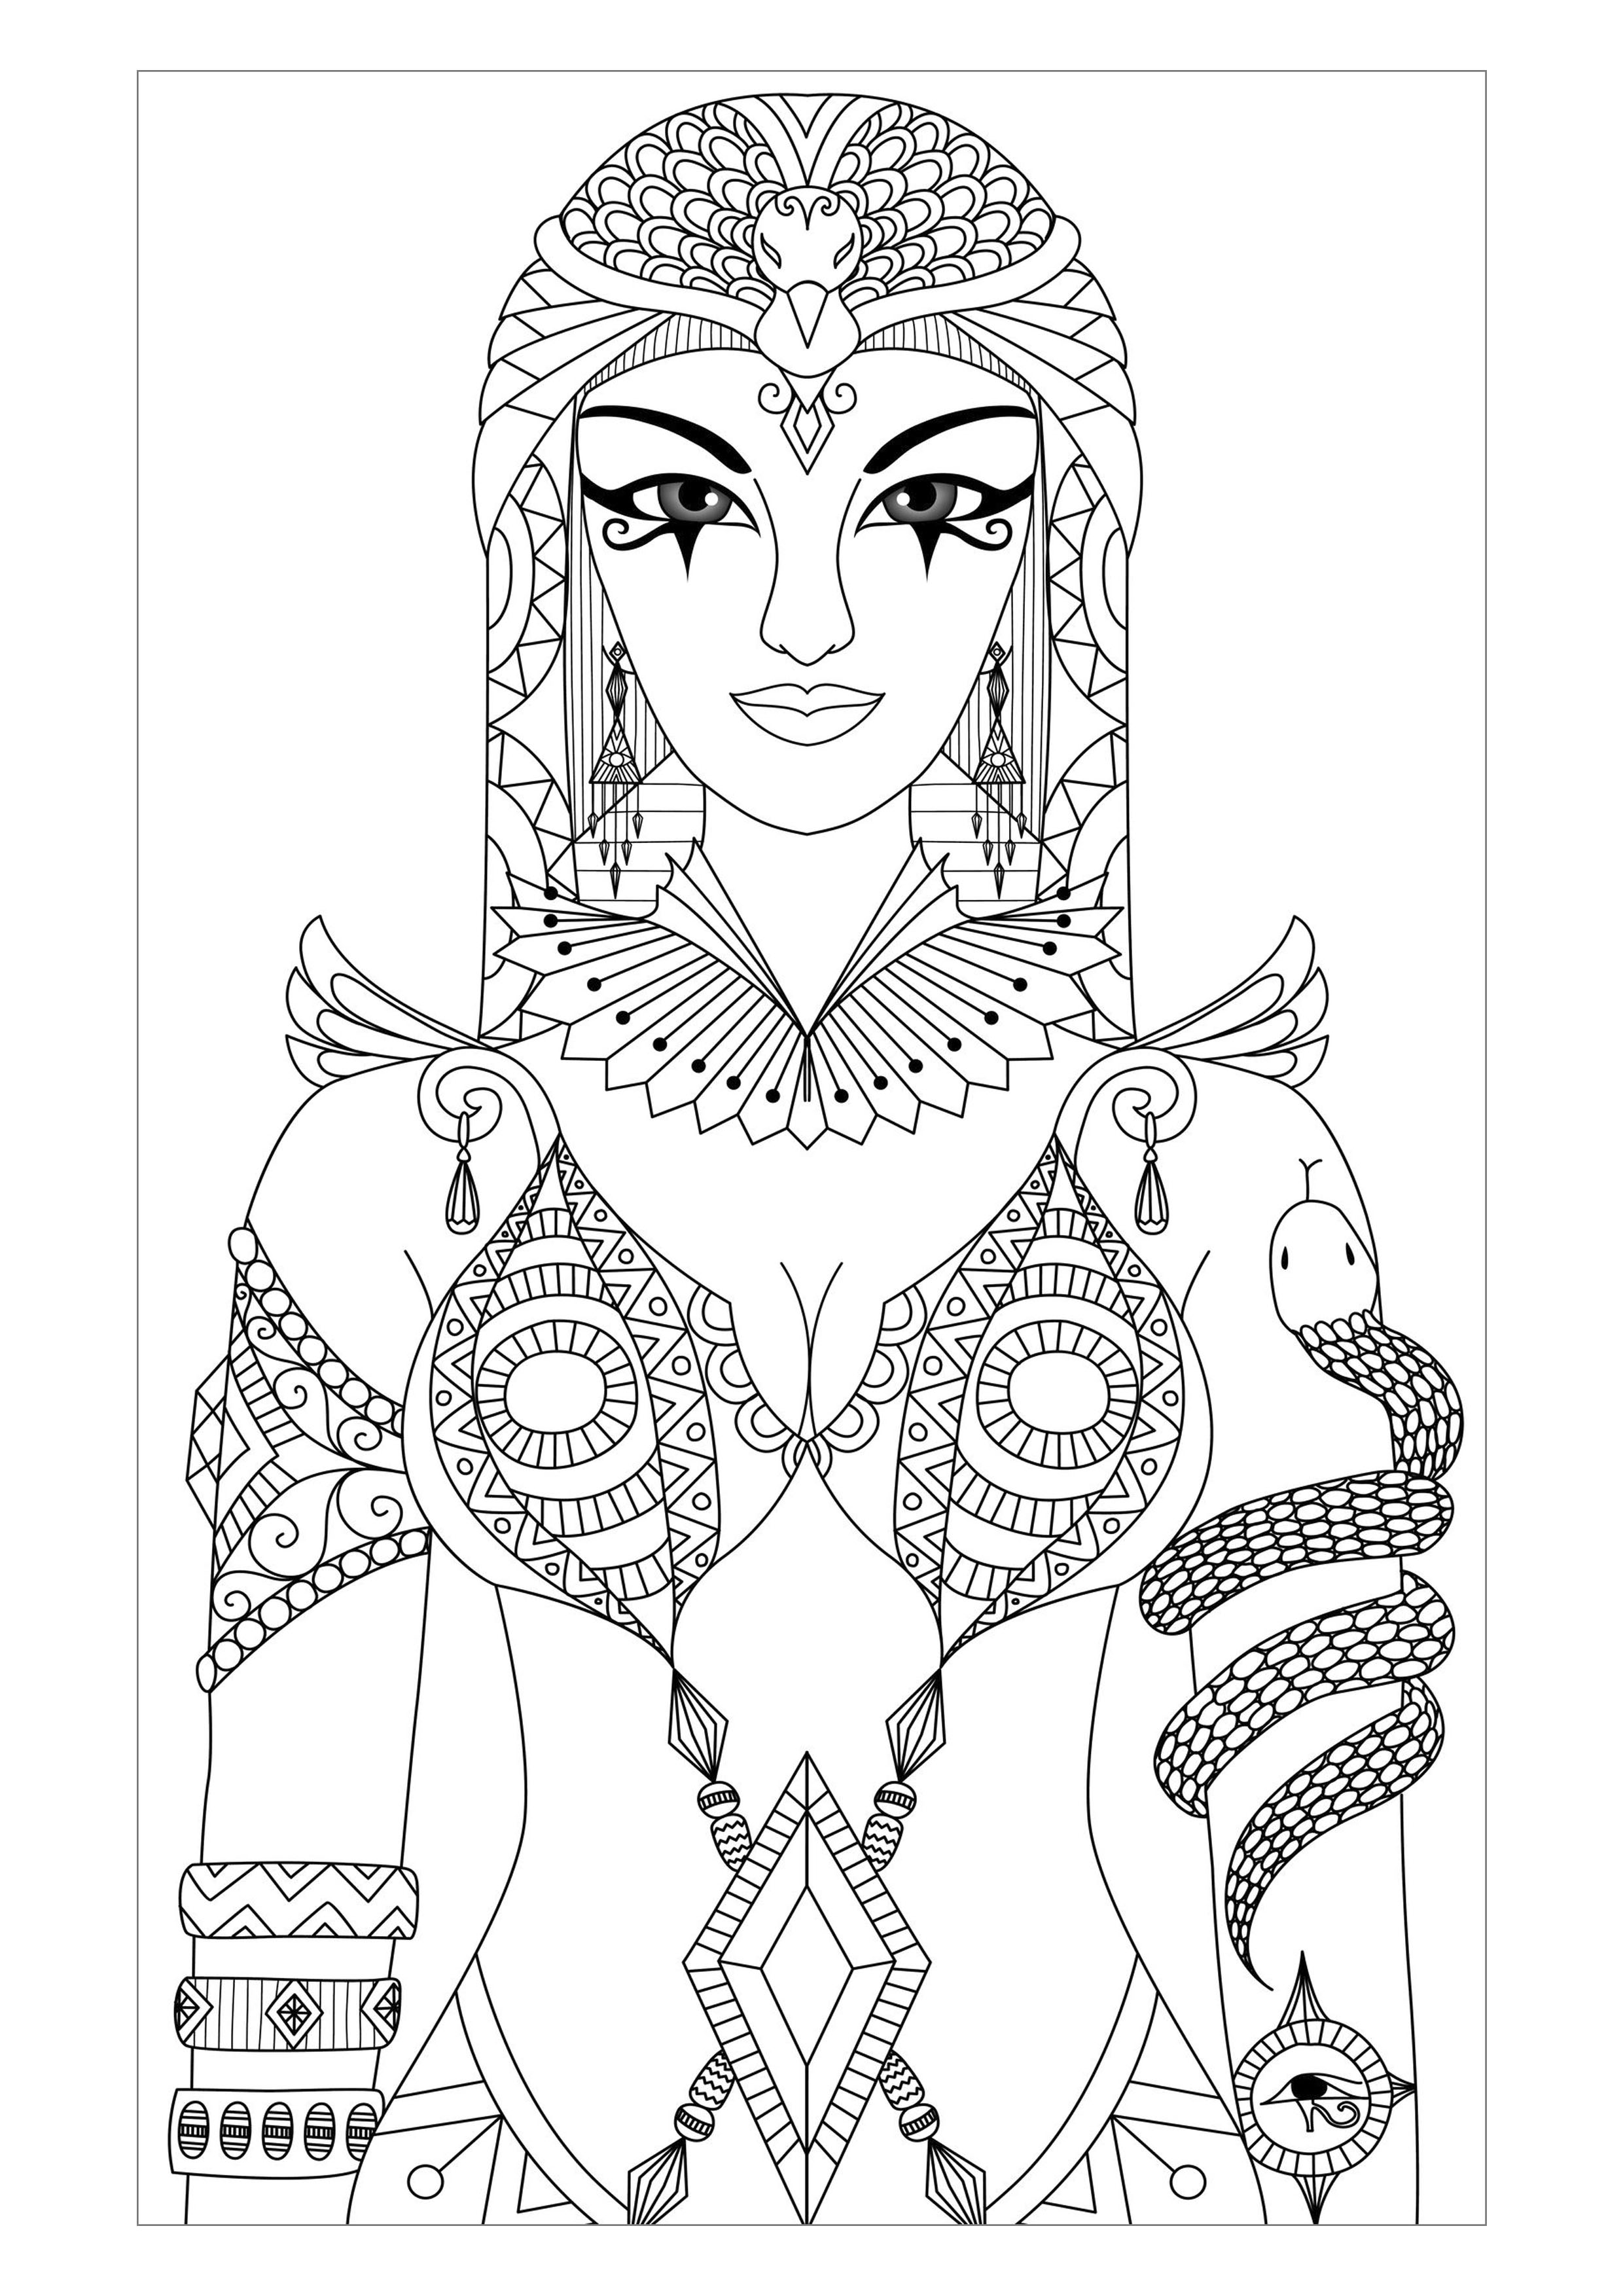 Download Egypt cleopatra queen - Egypt Adult Coloring Pages